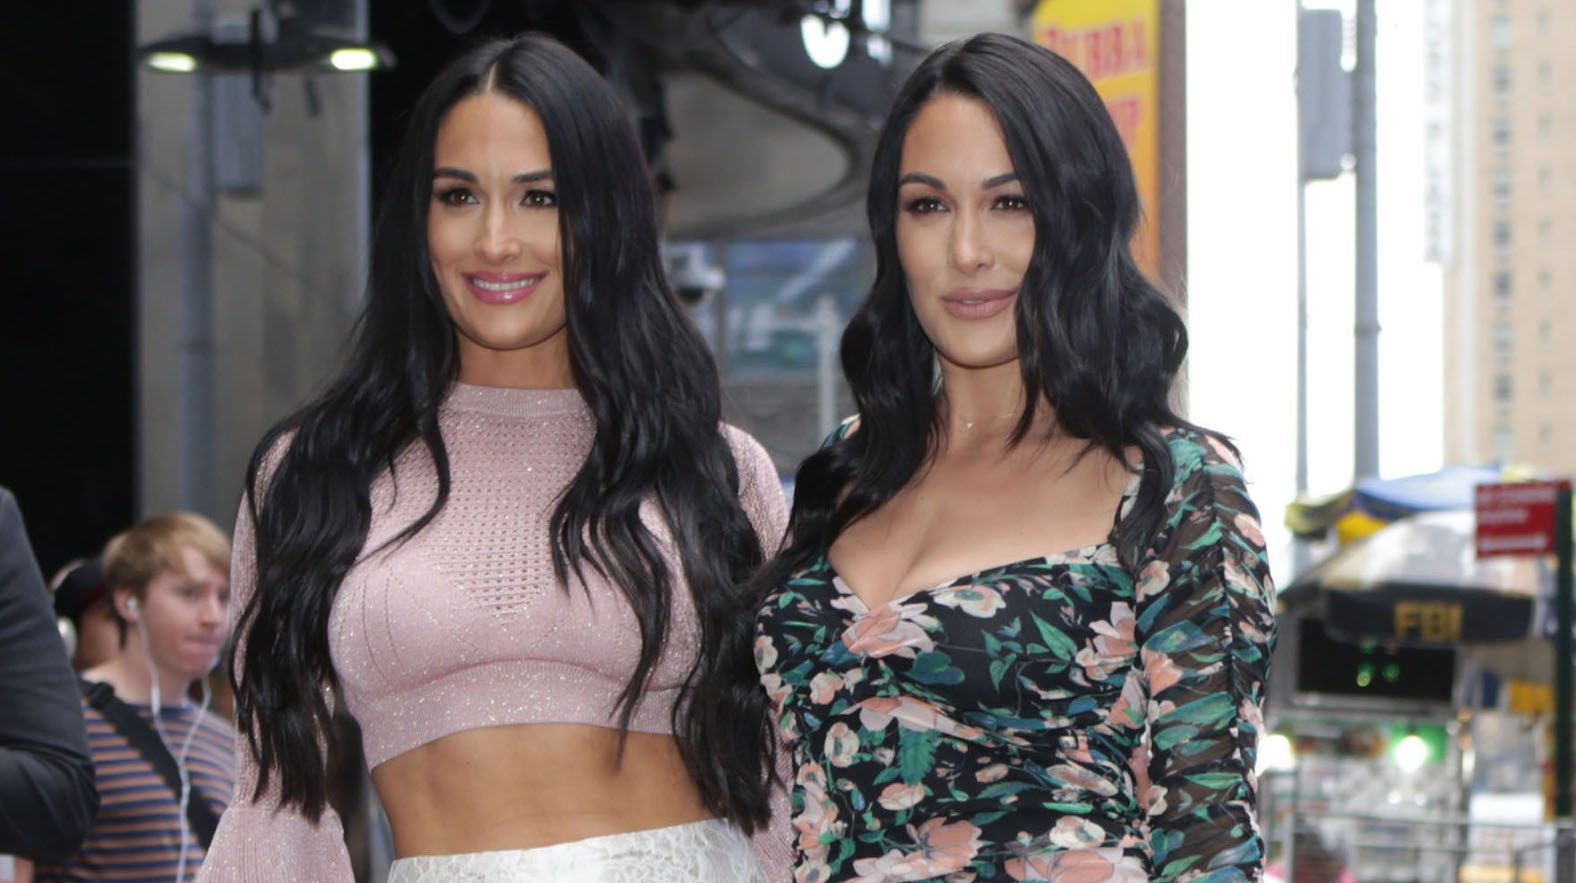 Nikki and Brie Bella step out in all-white ensembles for a lunch